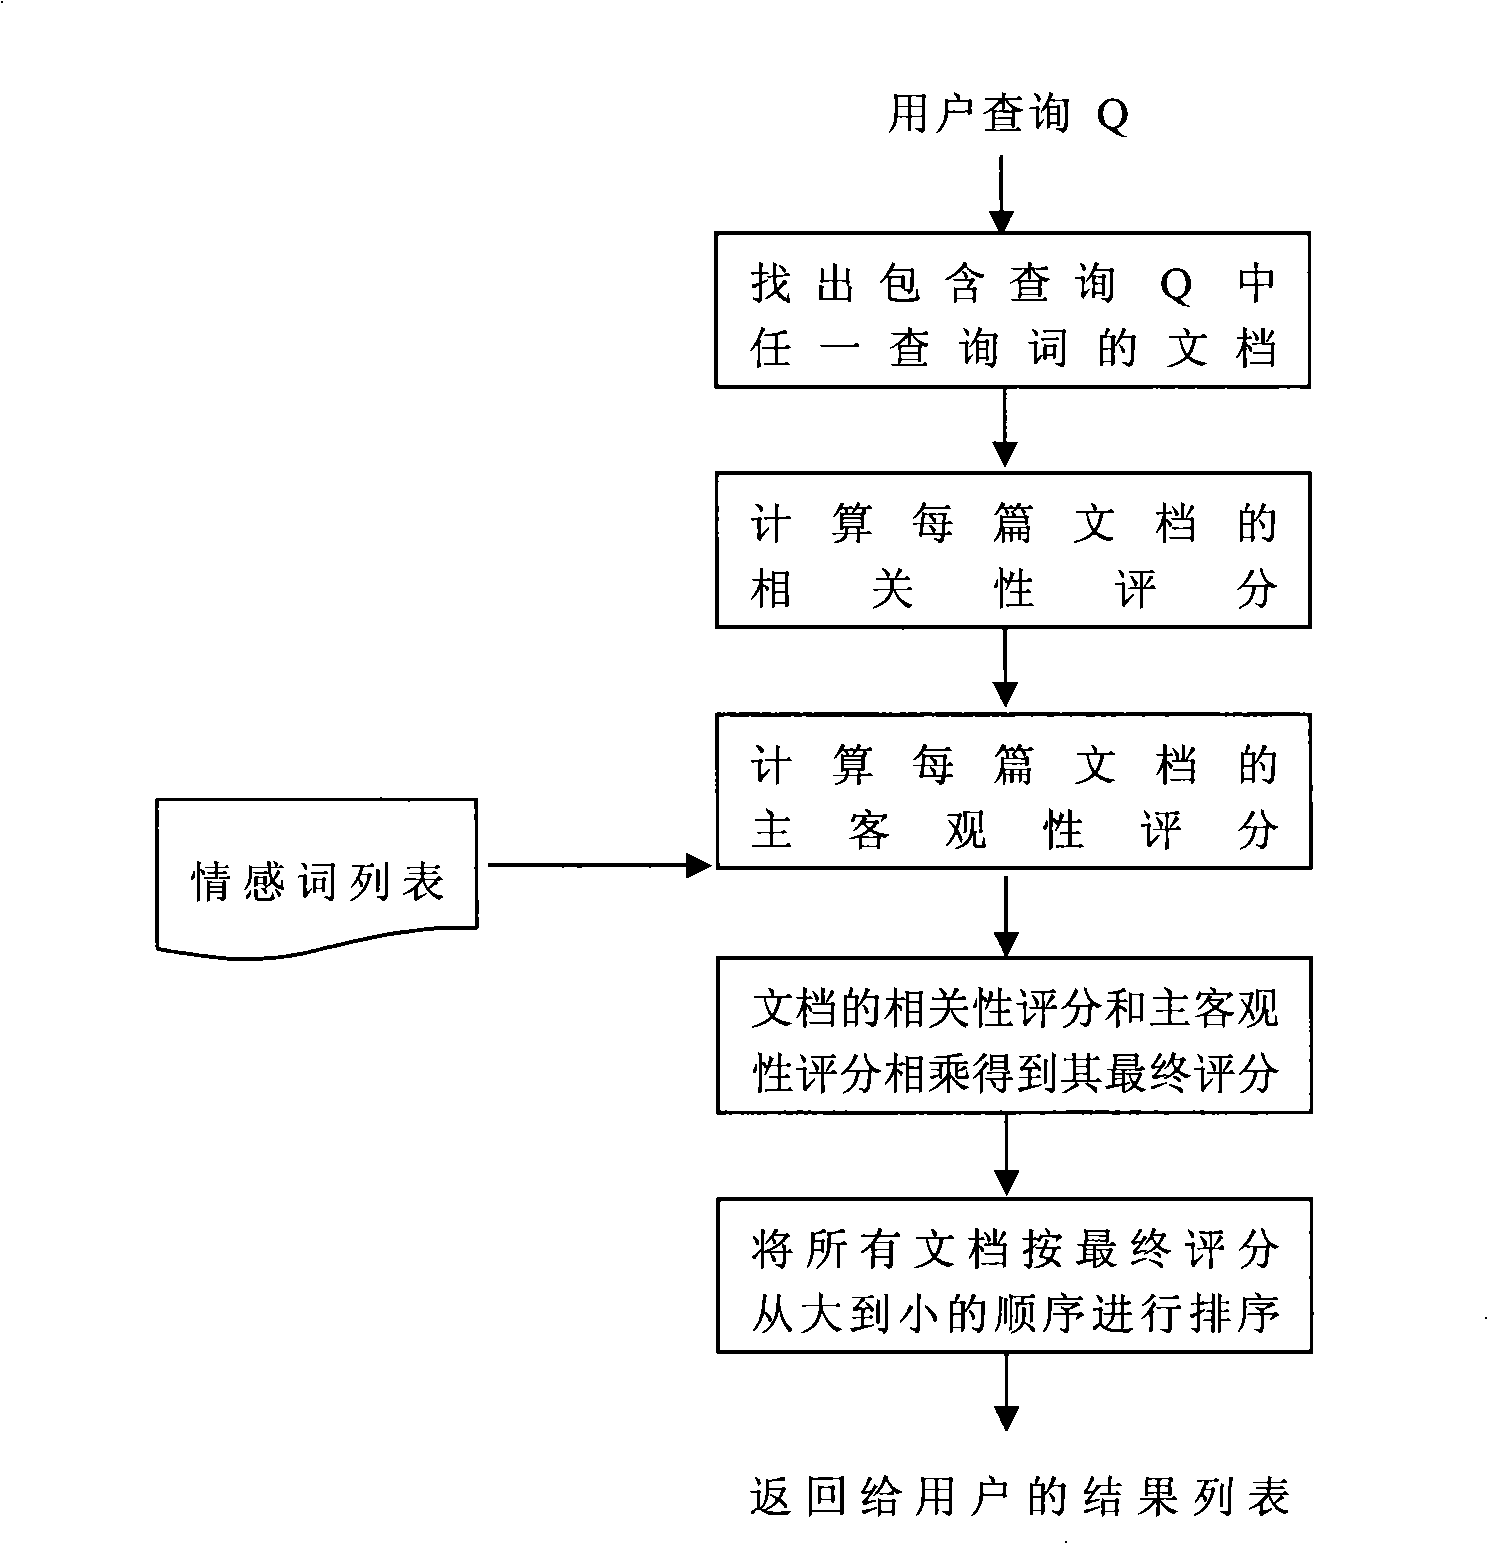 Grading method for information retrieval document based on viewpoint searching